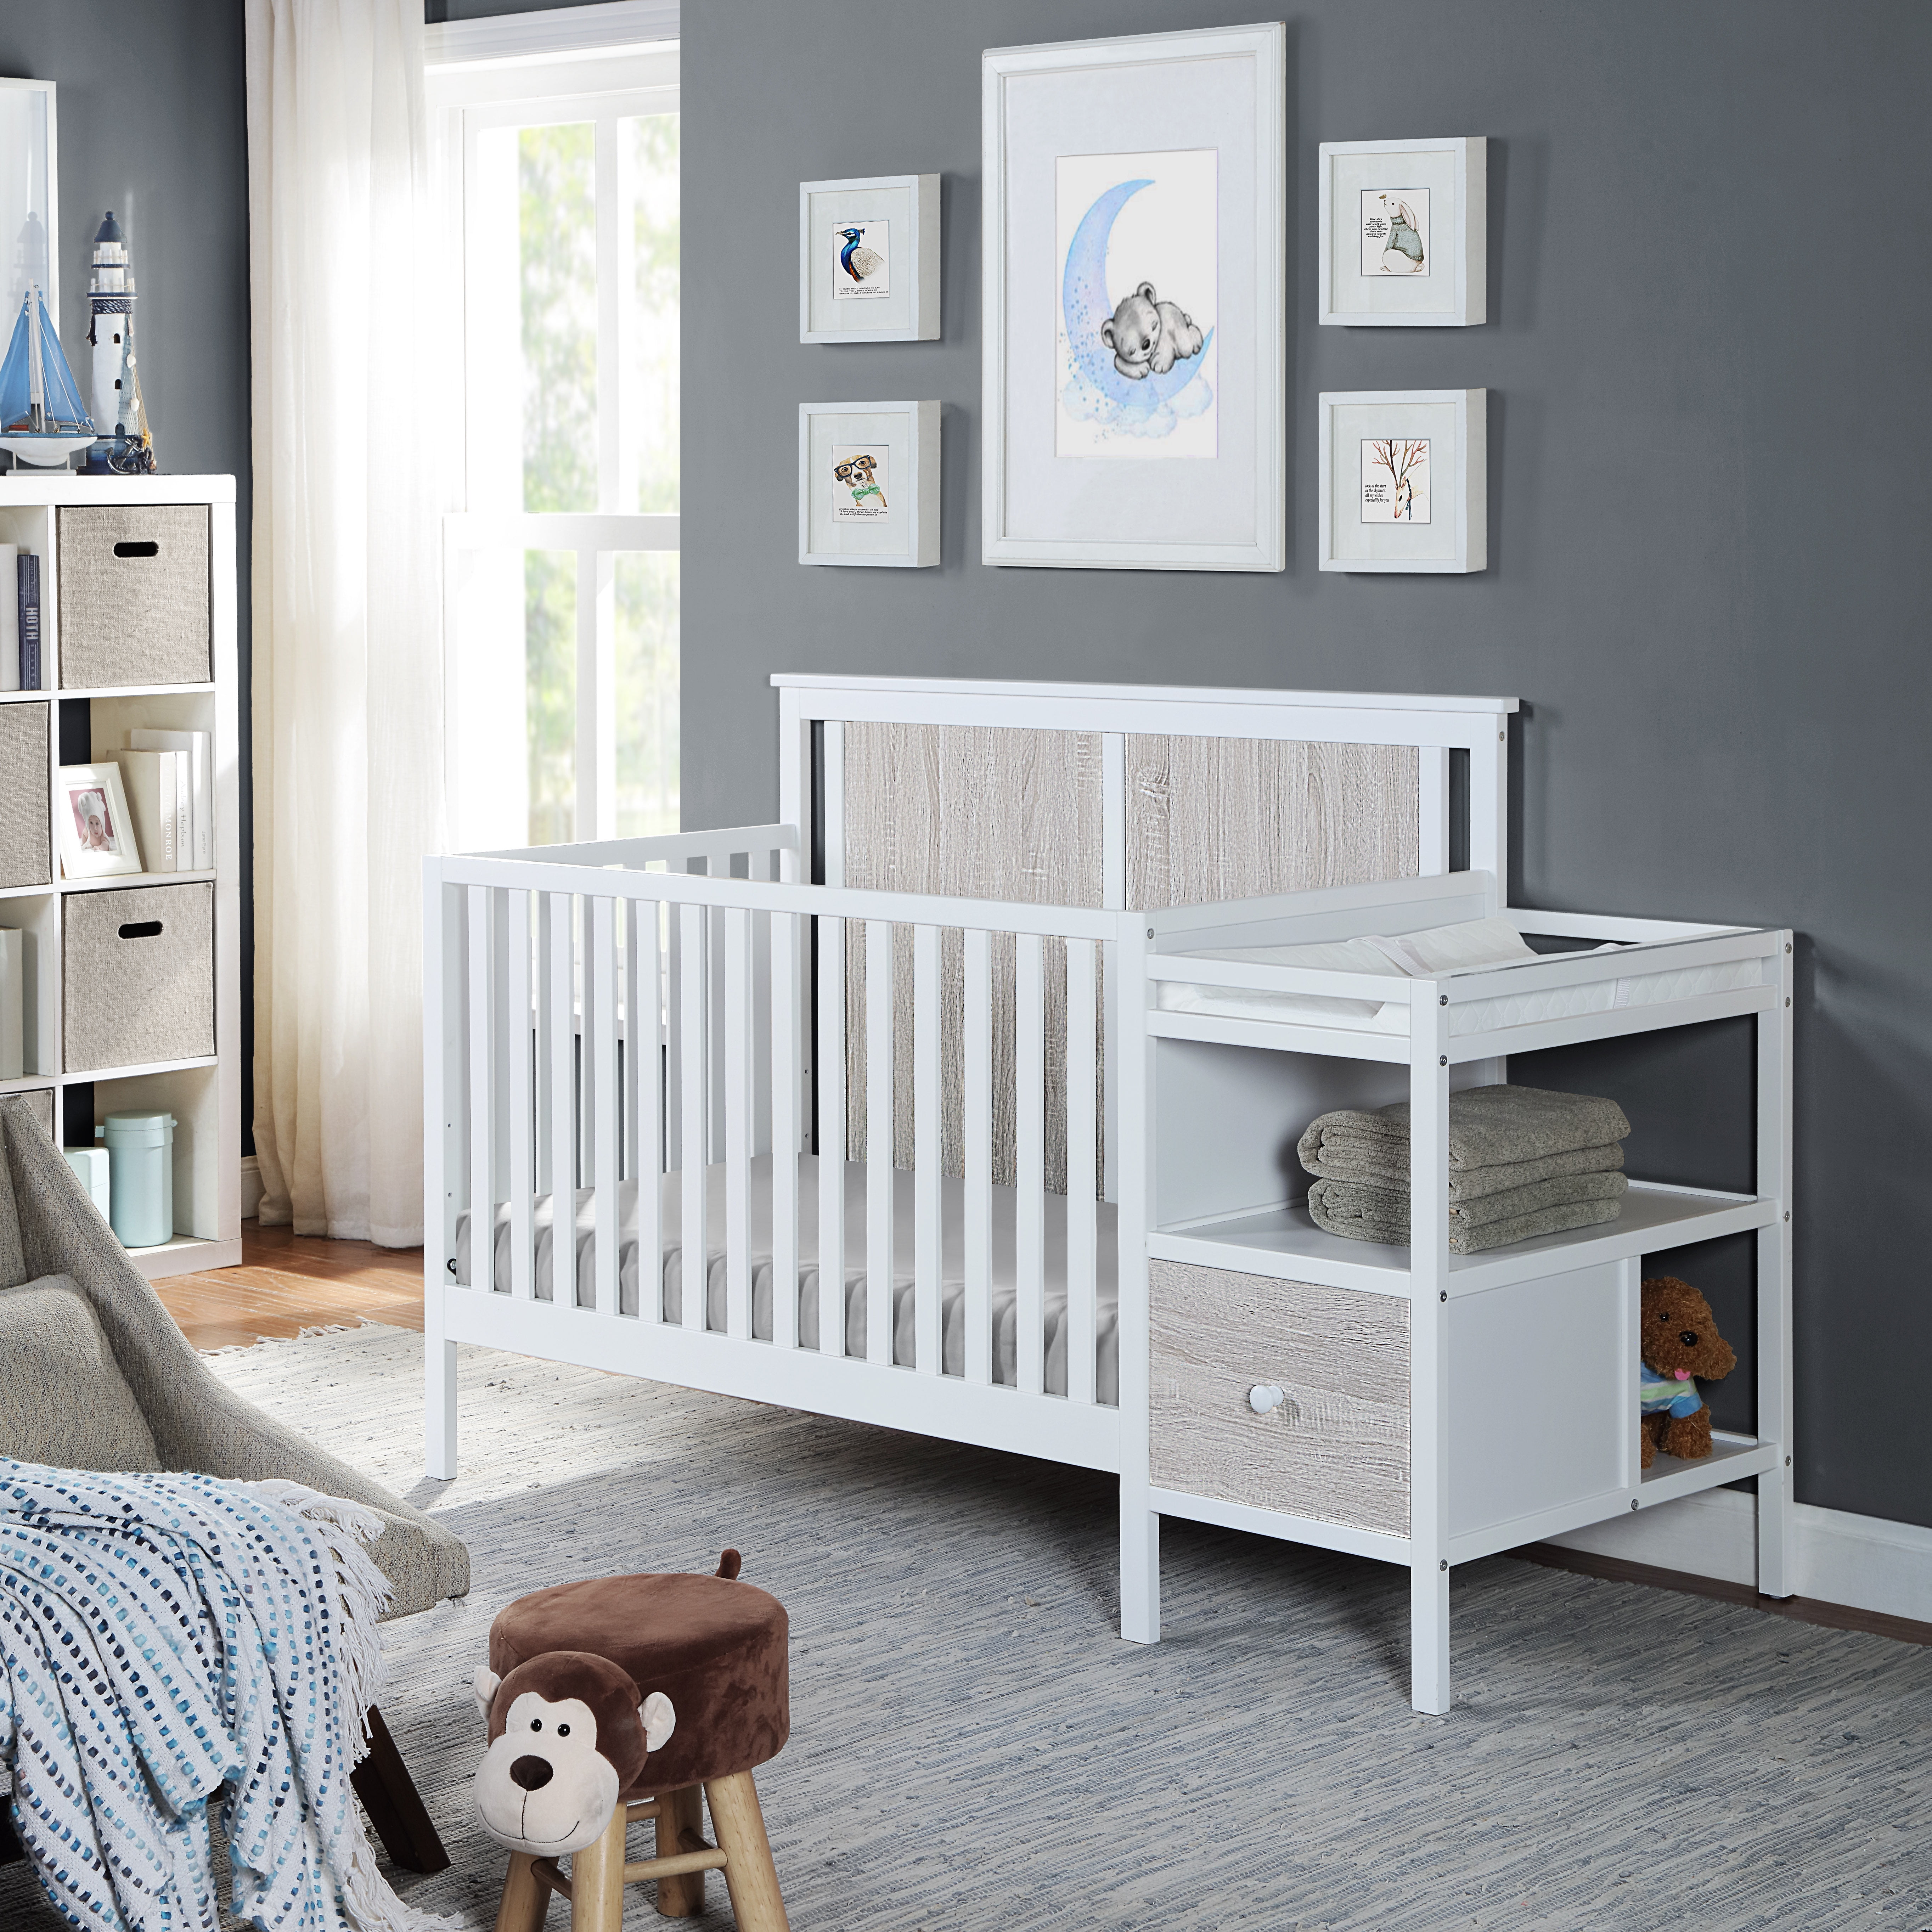 Suite Bebe Connelly 4-in-1 Crib and Changer White - Walmart.com